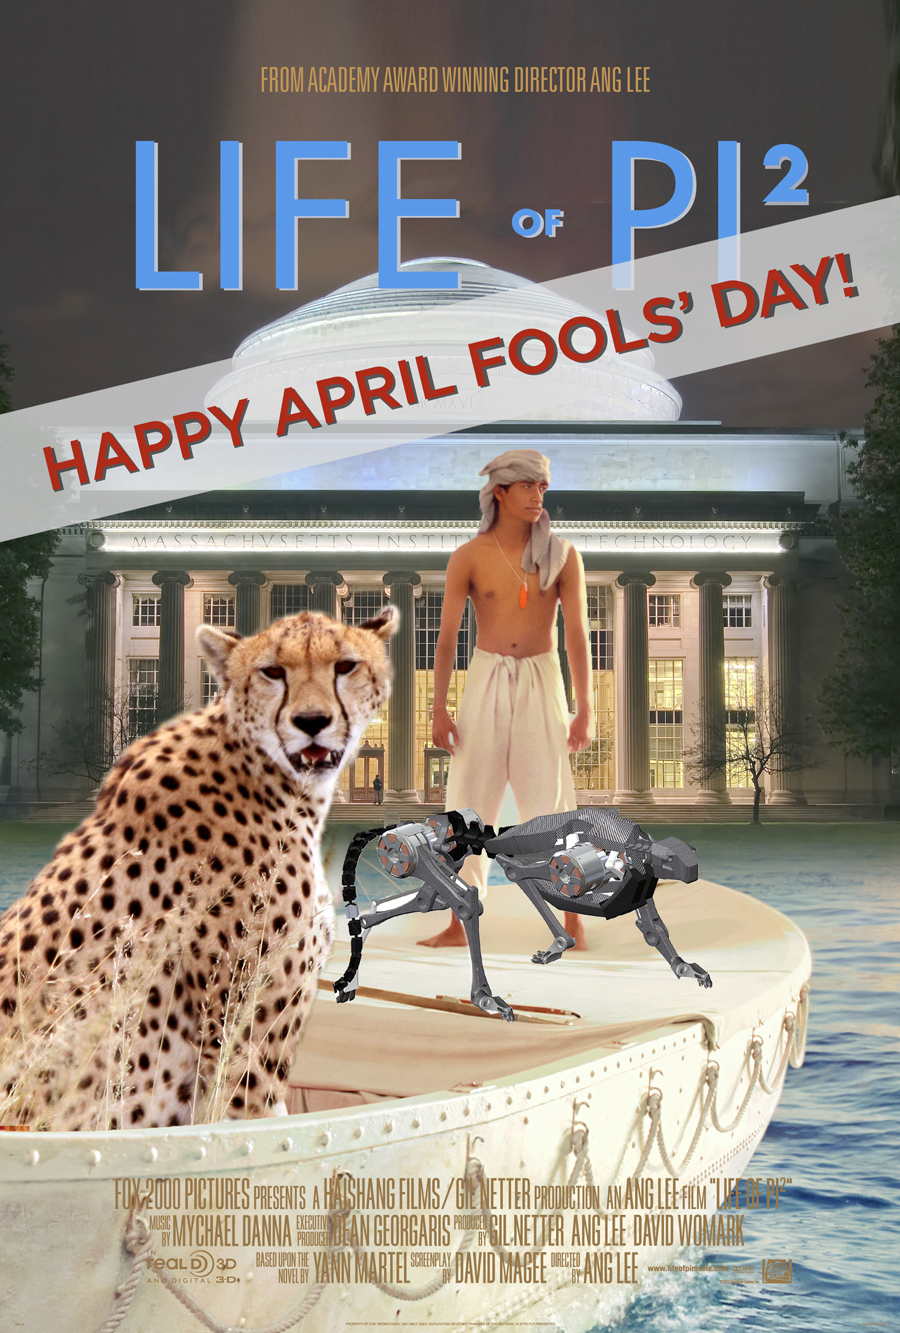 Life of Pi Sequel to be Filmed at MIT 